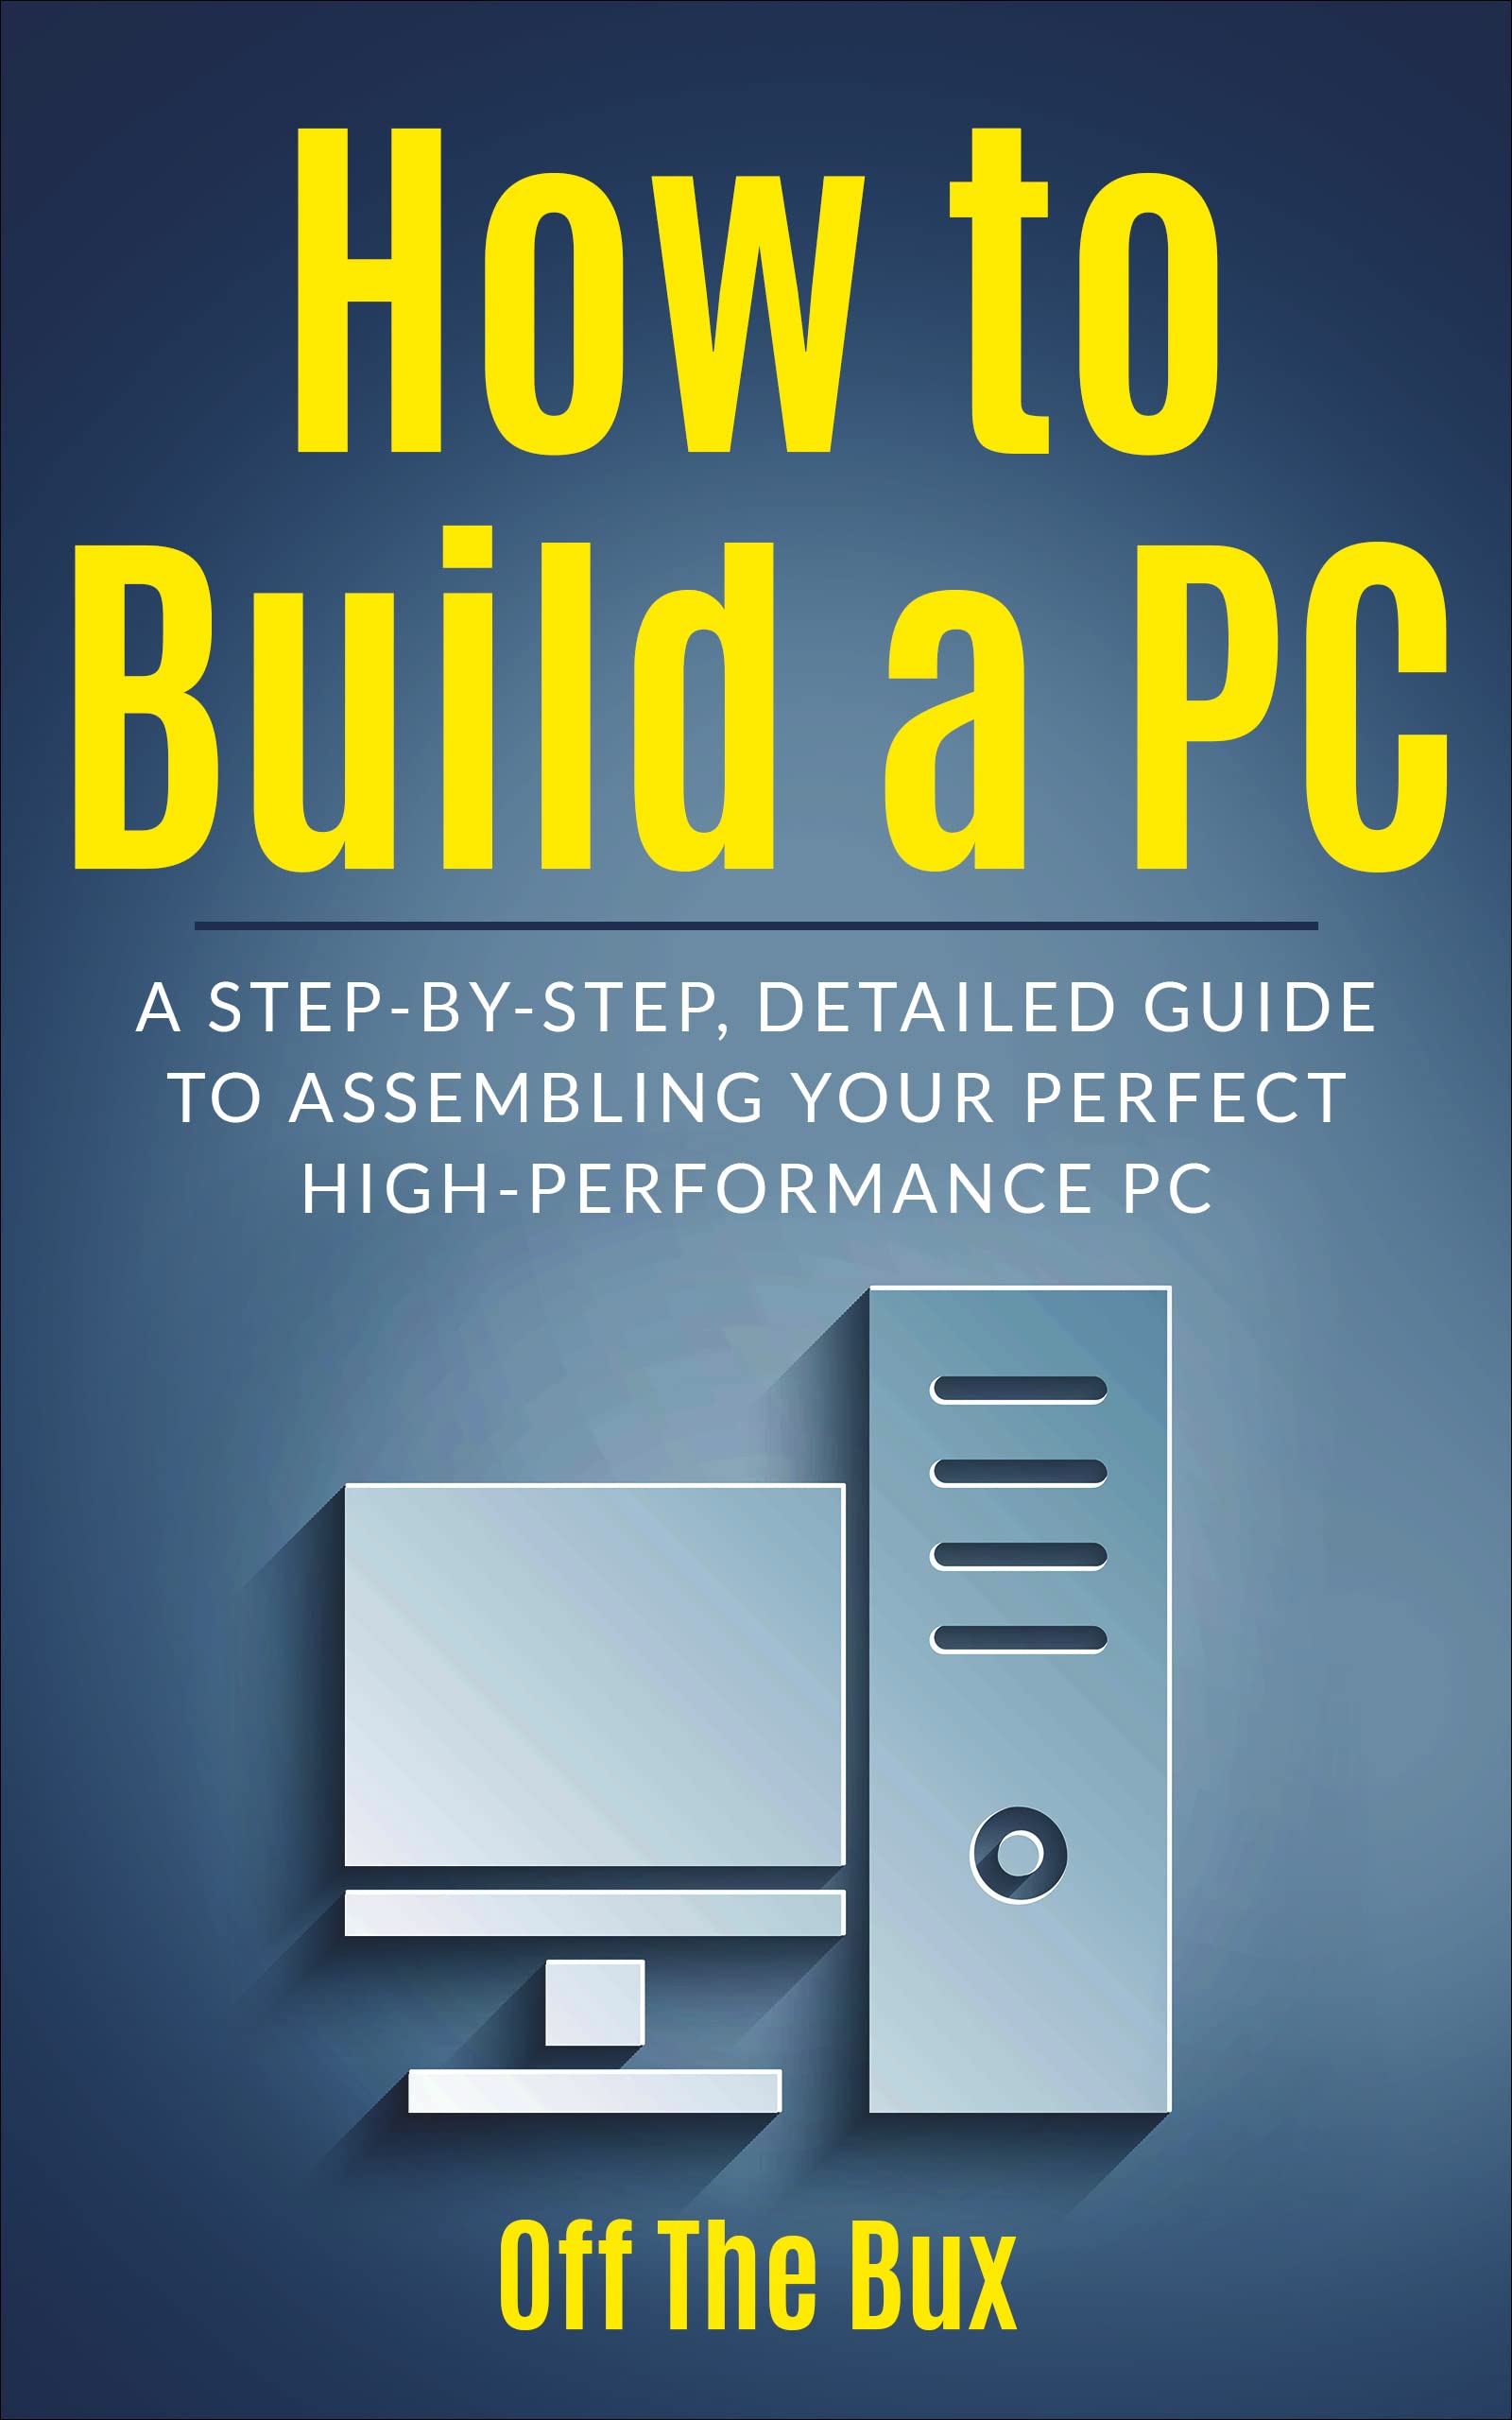 How to Build a PC: A Step-by-Step Detailed Guide to Assembling Your Perfect High Performance Gaming PC